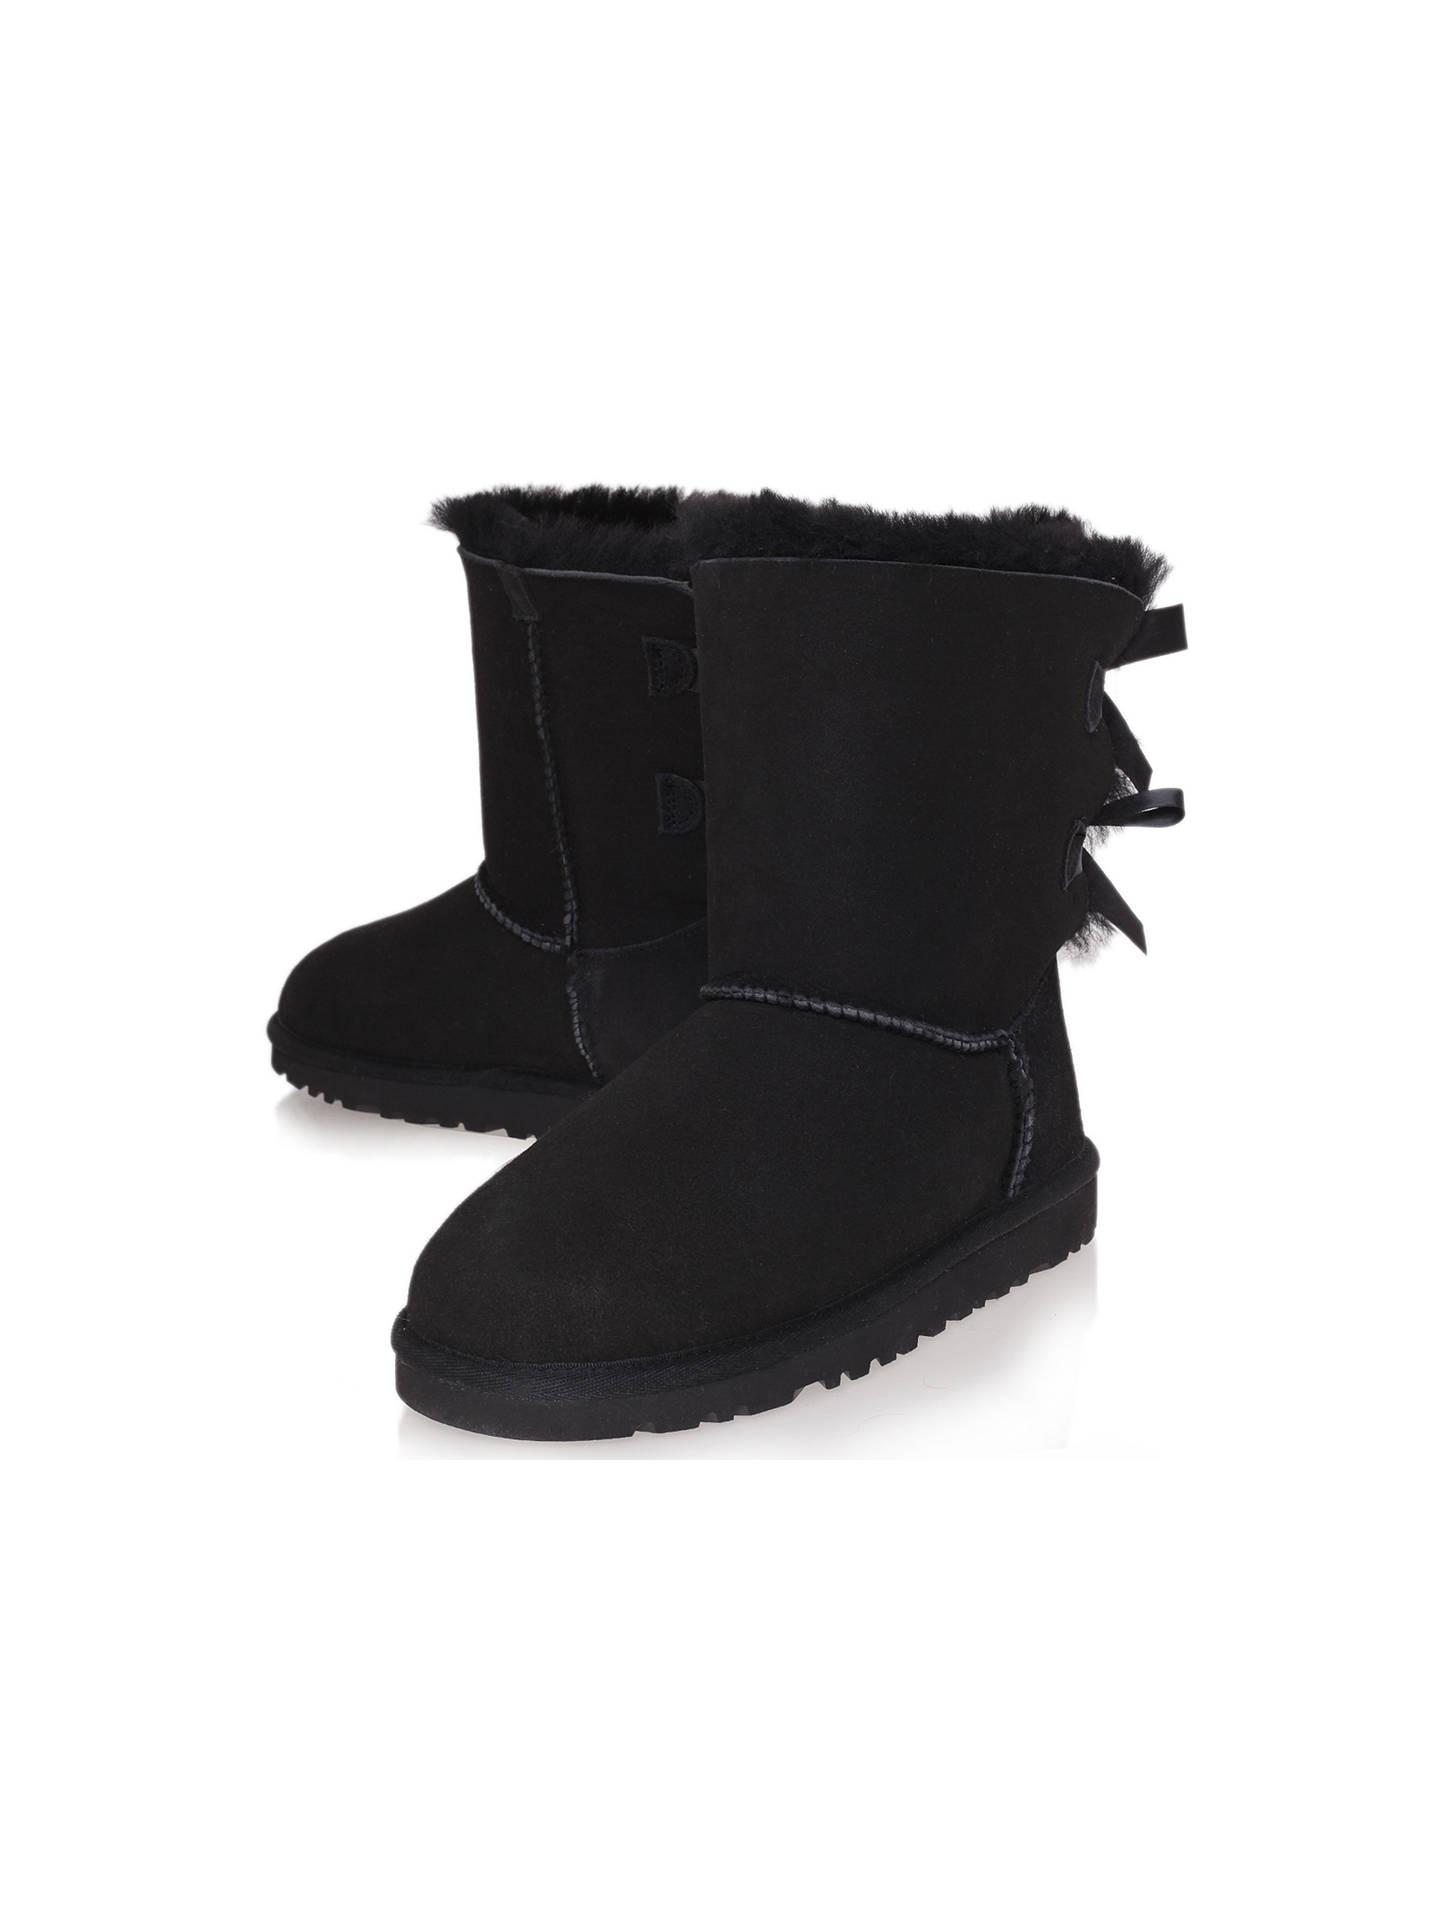 UGG Bailey Bow Short Boots at John Lewis & Partners